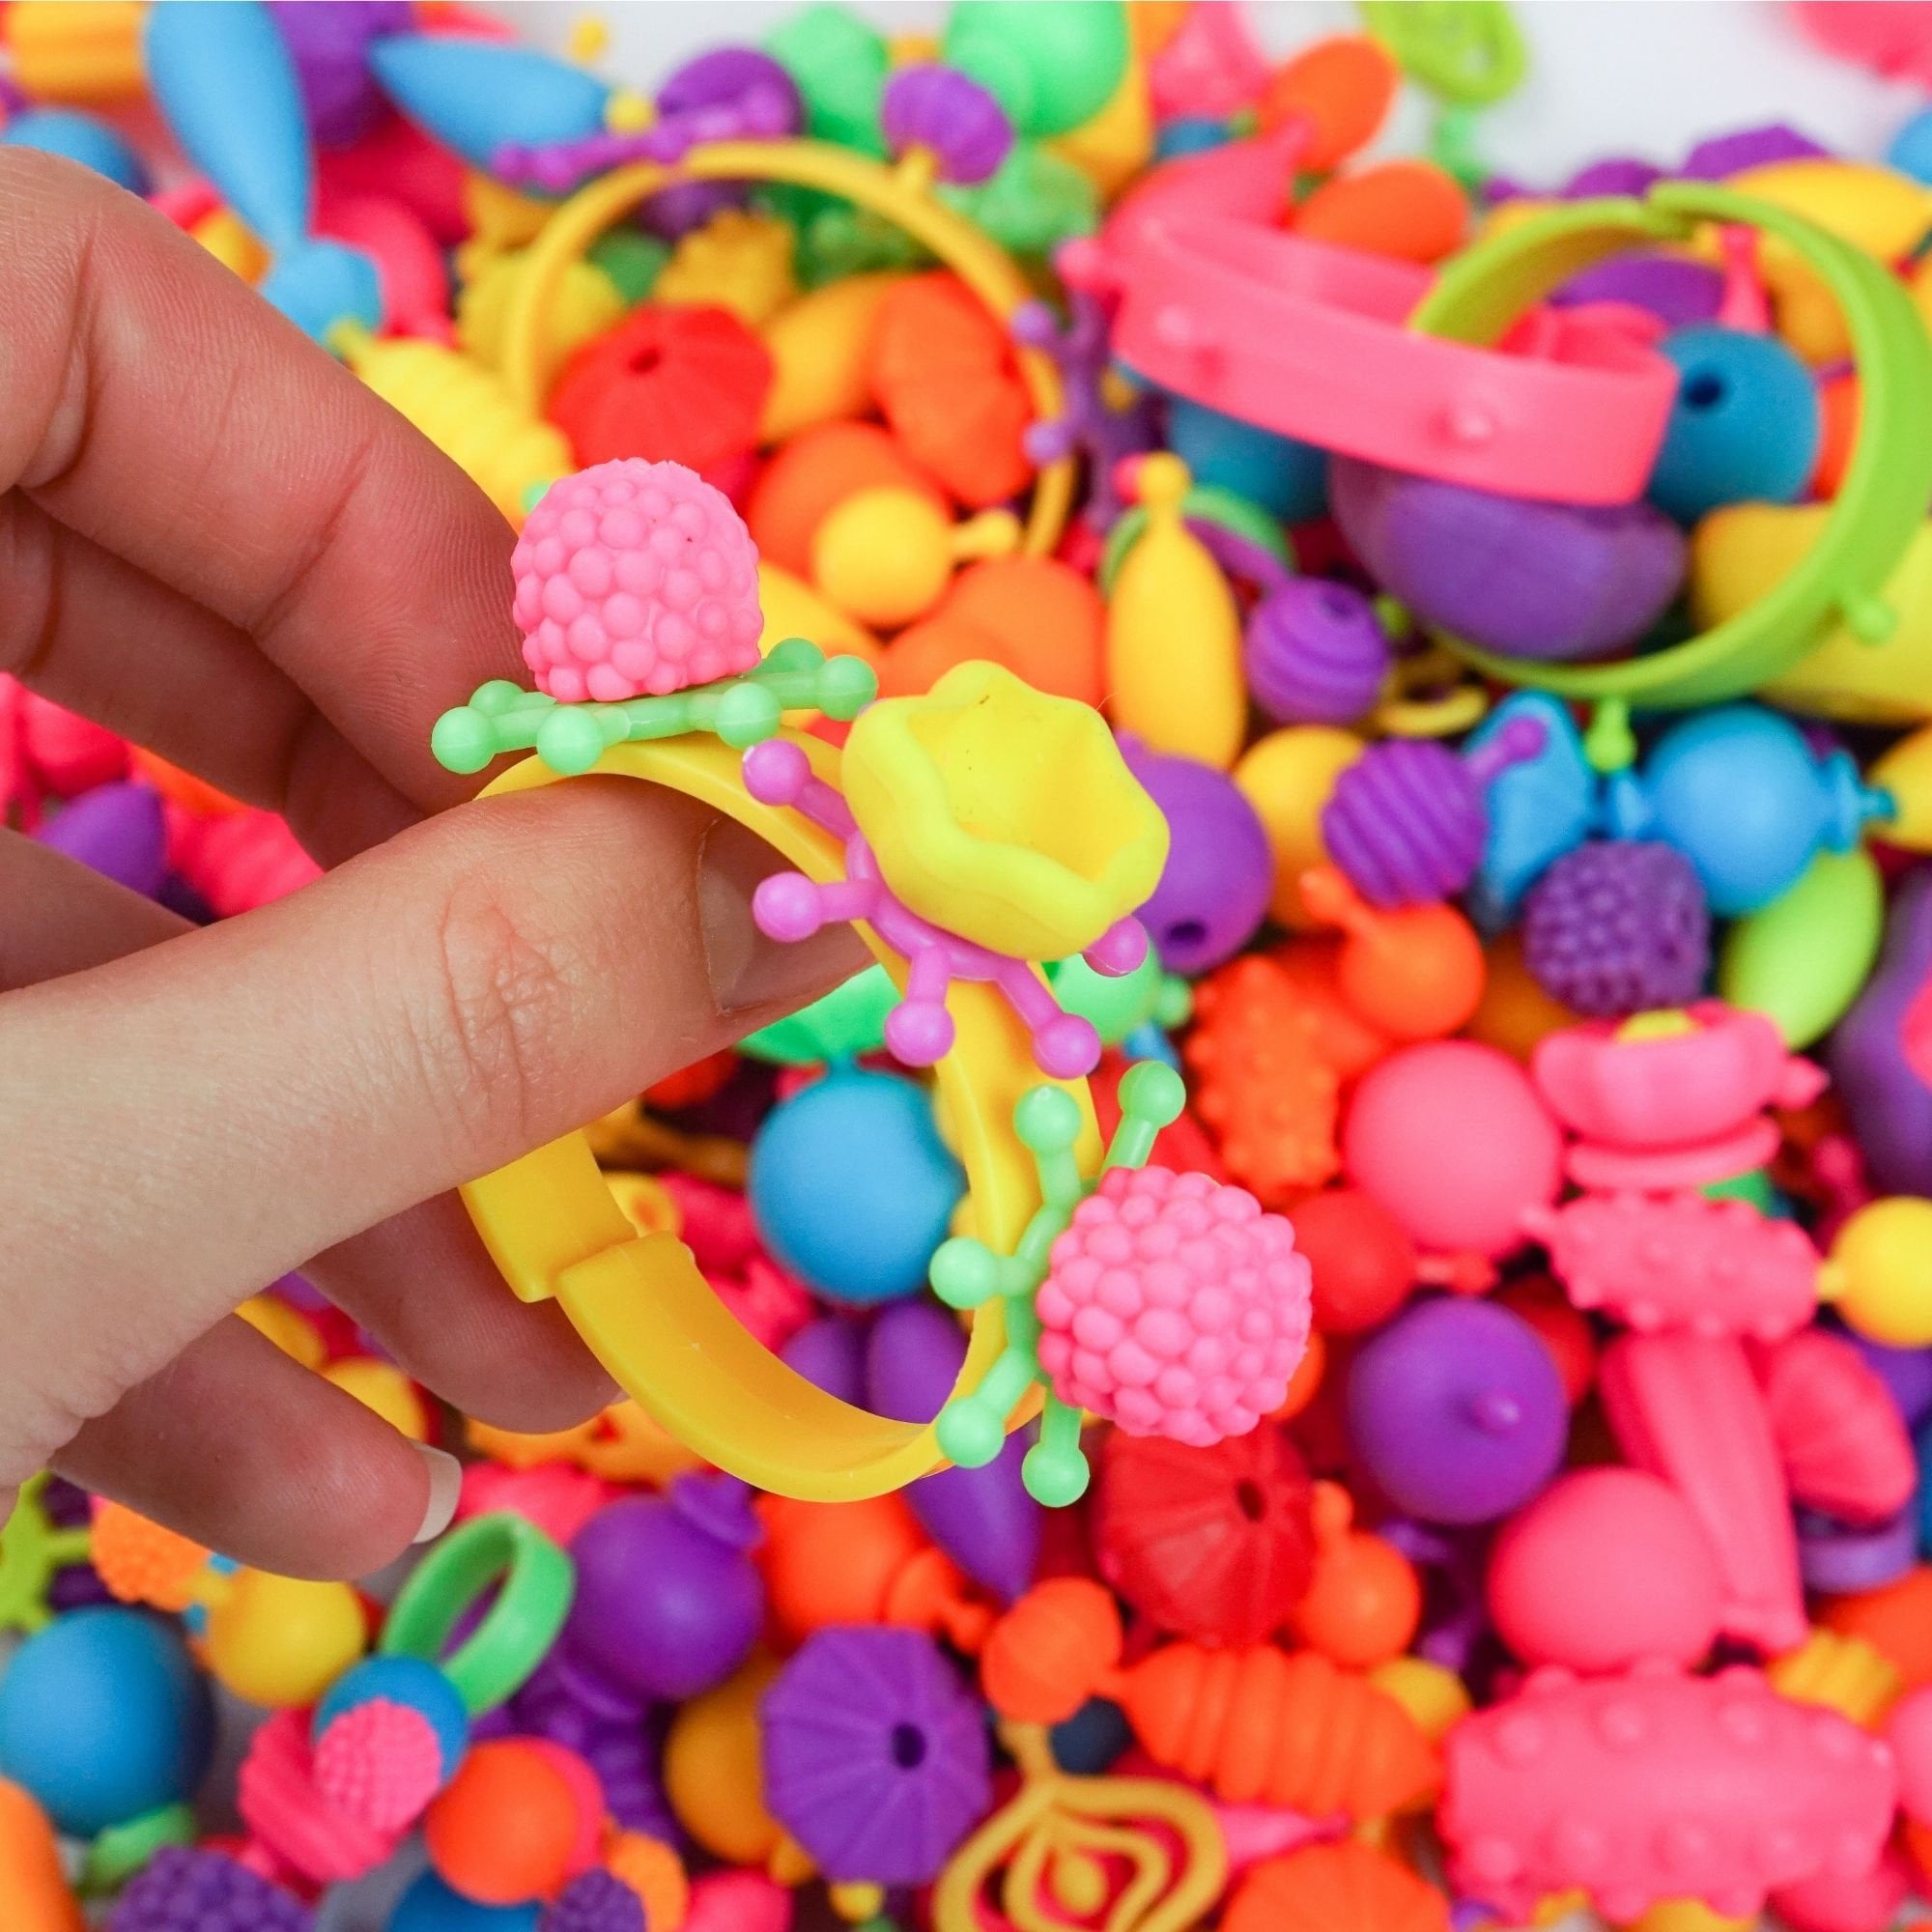  1000+ Snap Pop Beads for Girls Toys - Kids Jewelry